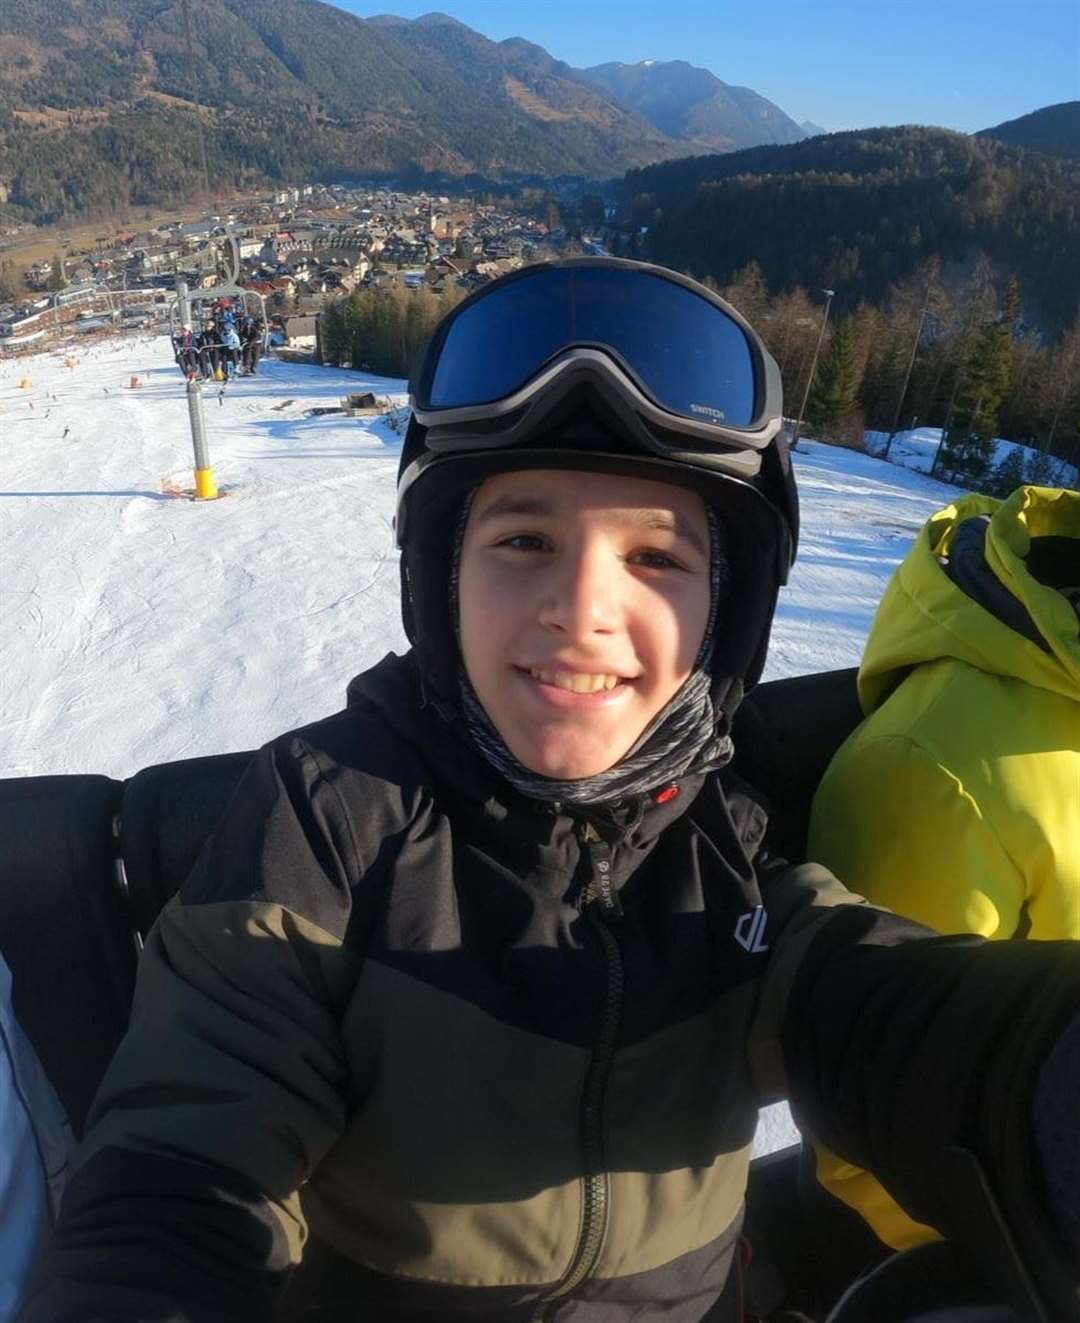 Filip's recovery has gone well and he recently enjoyed a snowboarding holiday.